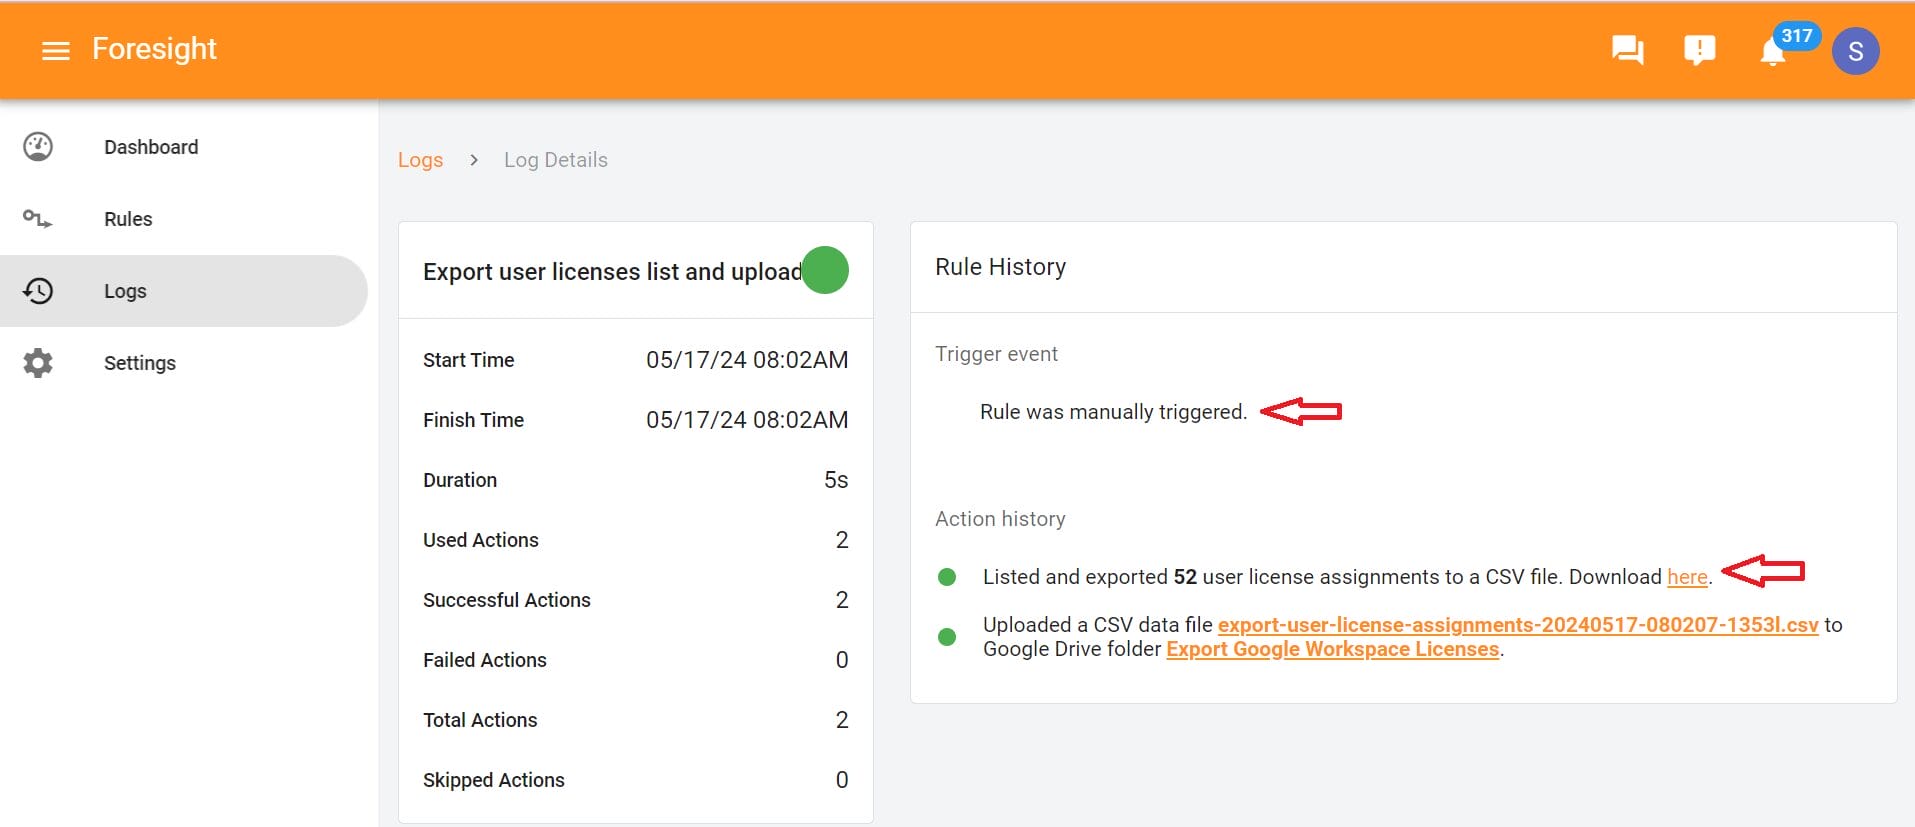 Additionally, navigate to the Logs page to confirm the successful execution of the rule